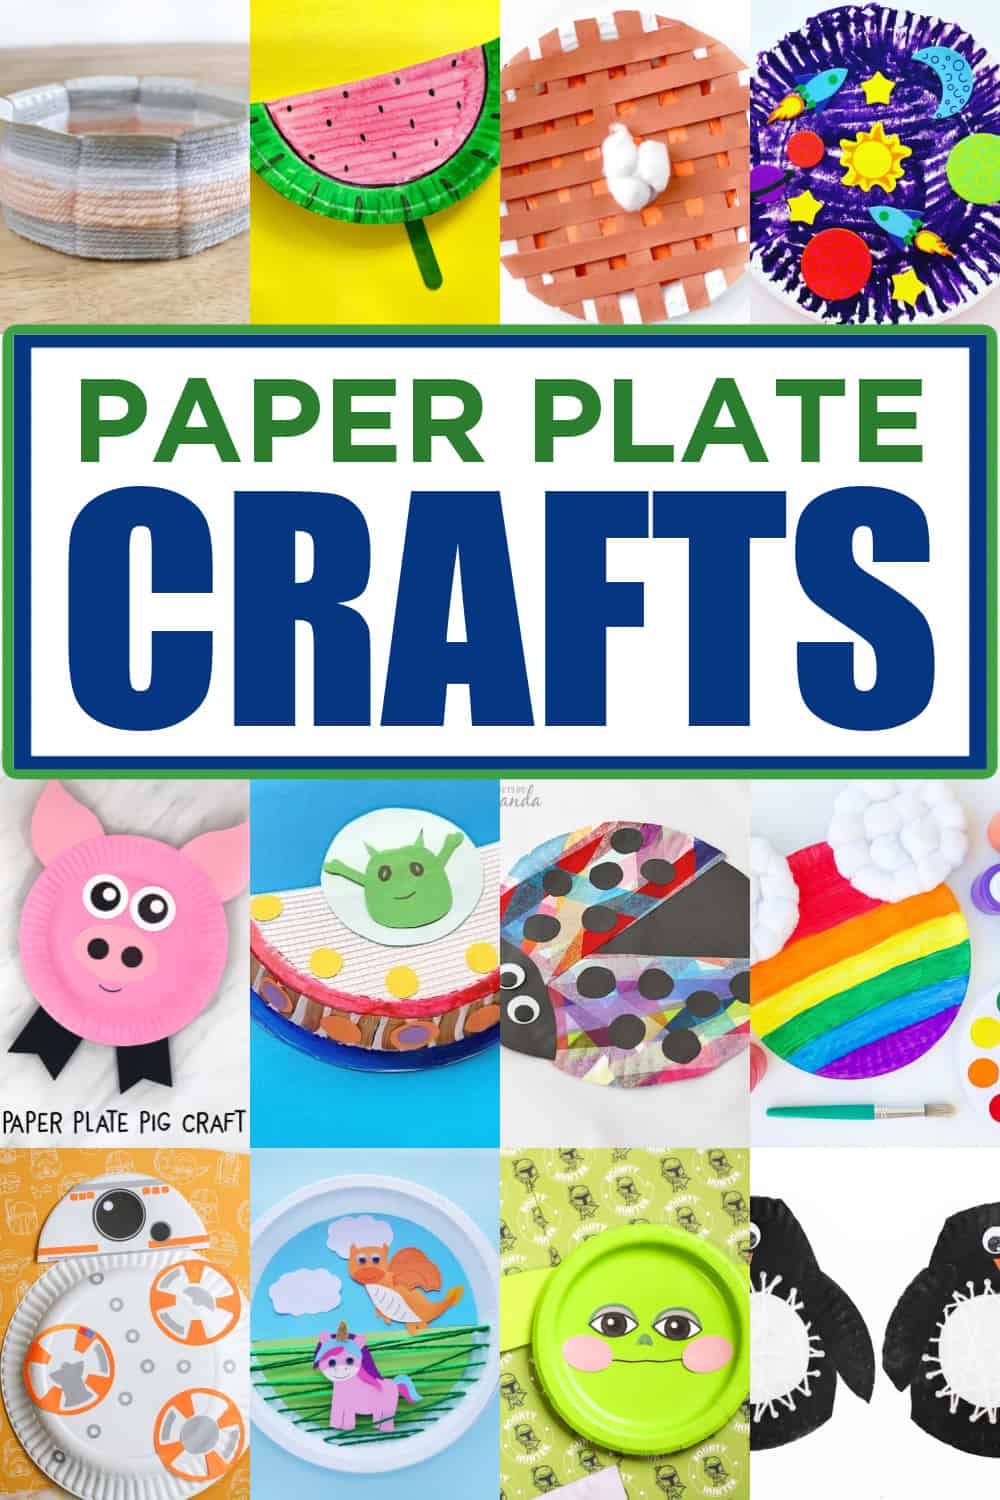 https://www.madewithhappy.com/wp-content/uploads/paper-plate-crafts-for-kids.jpg